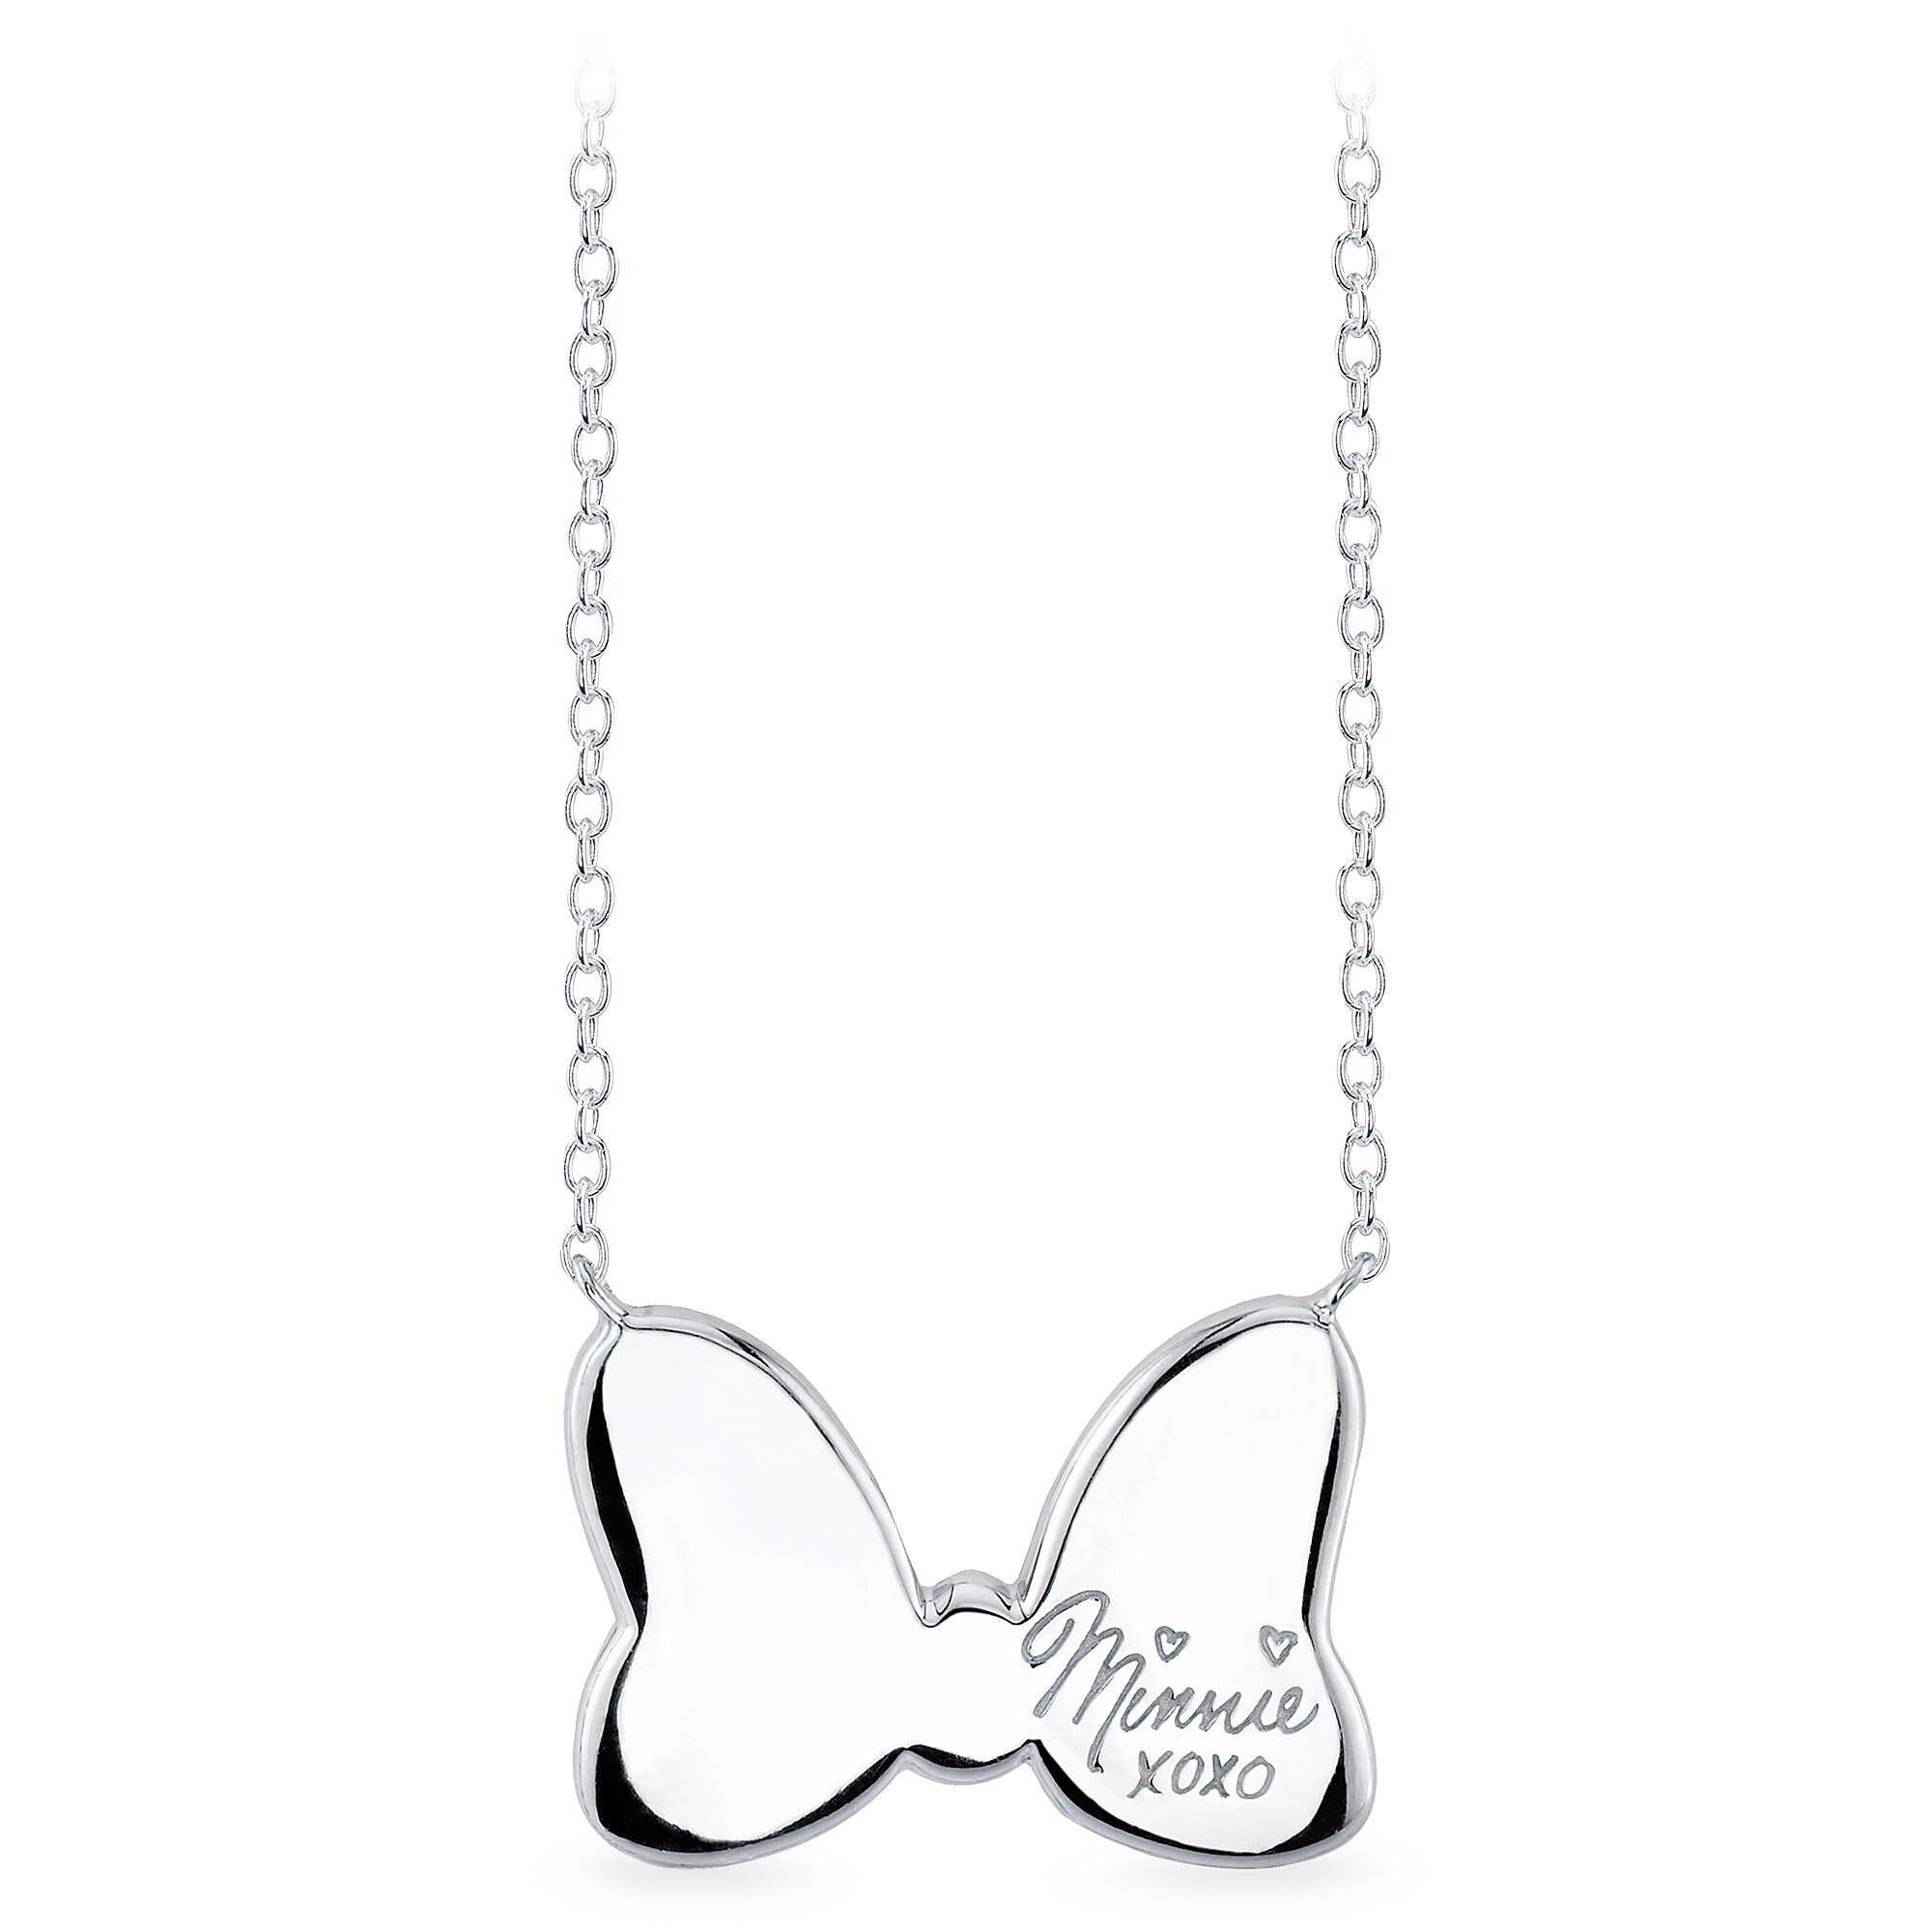 Minnie Mouse Black Bow Sterling Silver Necklace by RockLove